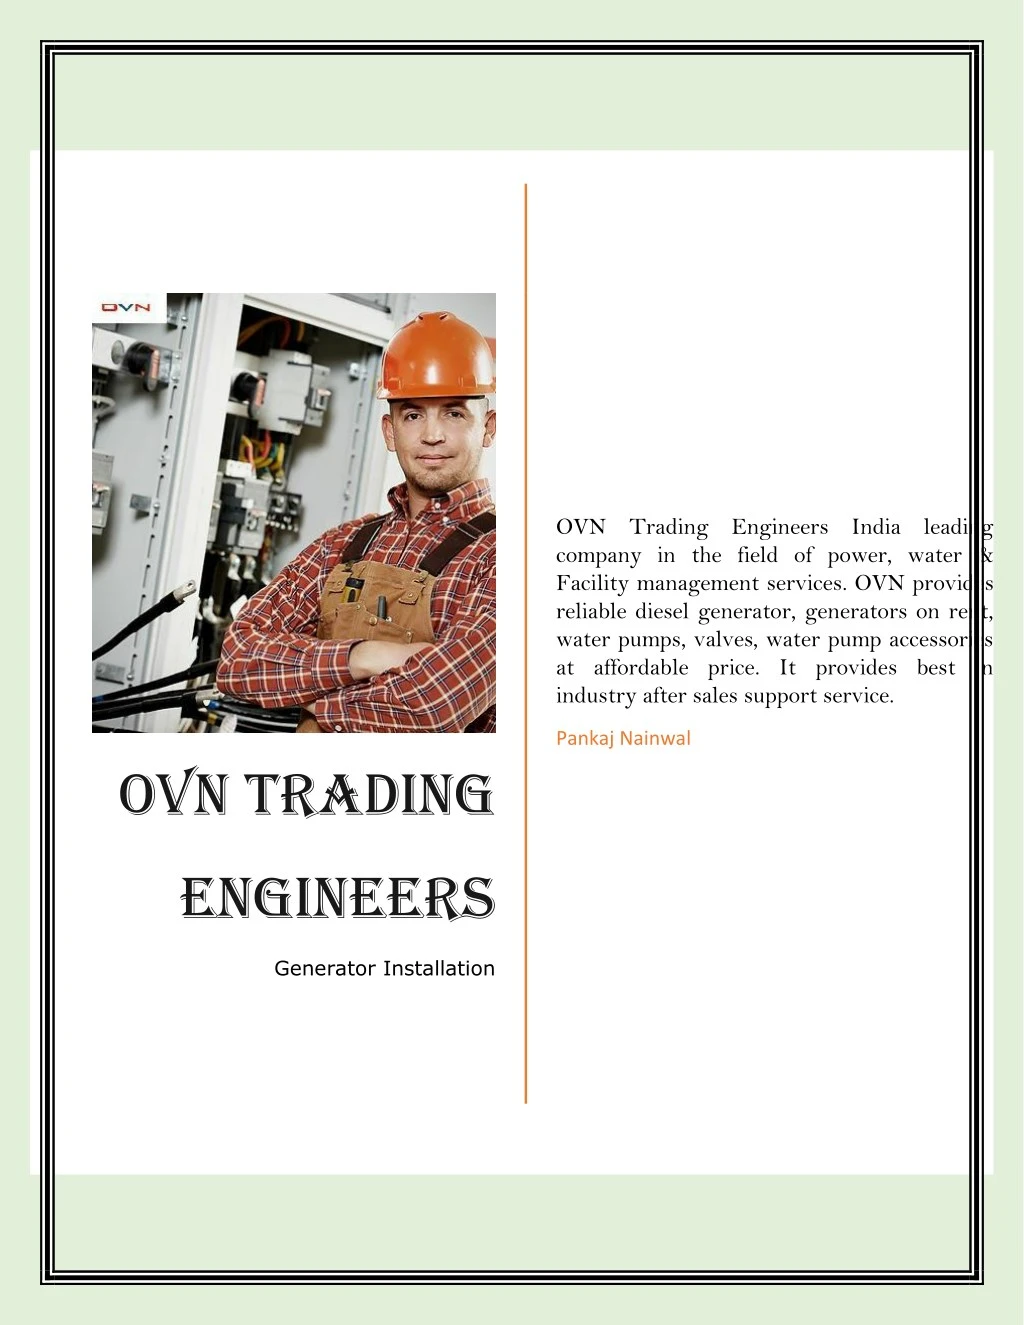 ovn trading engineers india leading company